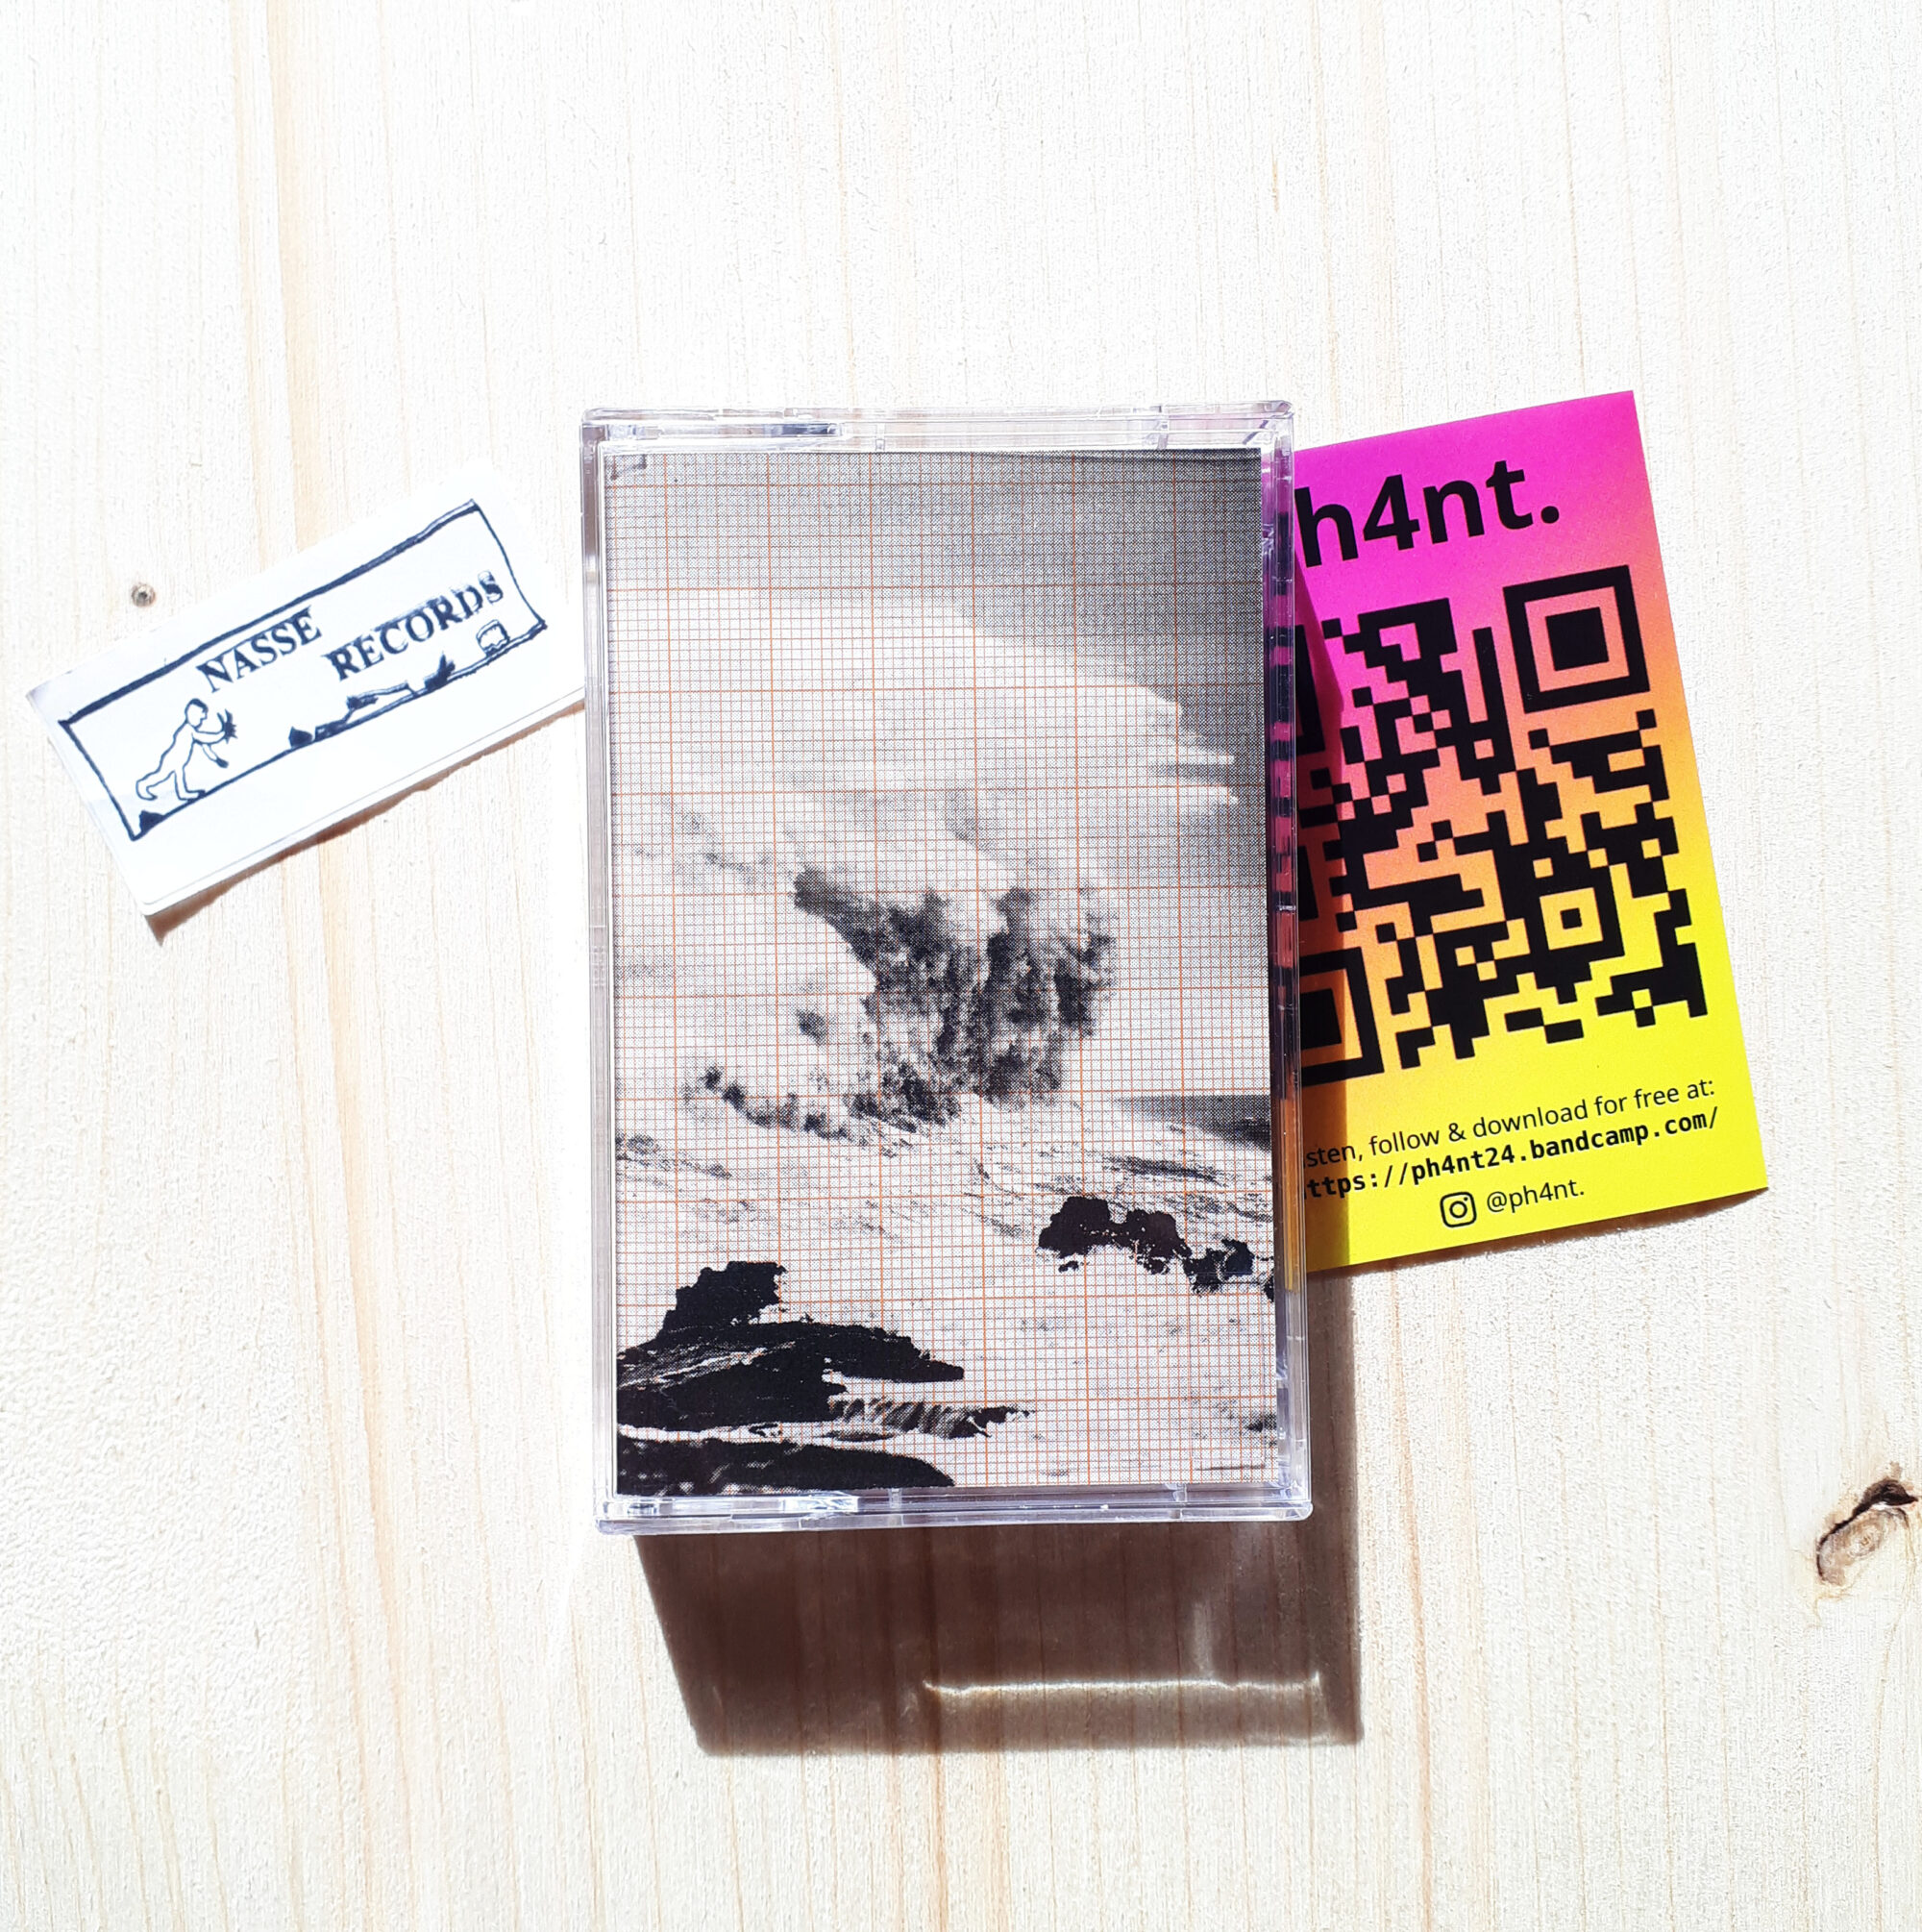 Picture of music cassette ph4nt. - 2047. Front cover and some stickers are shown